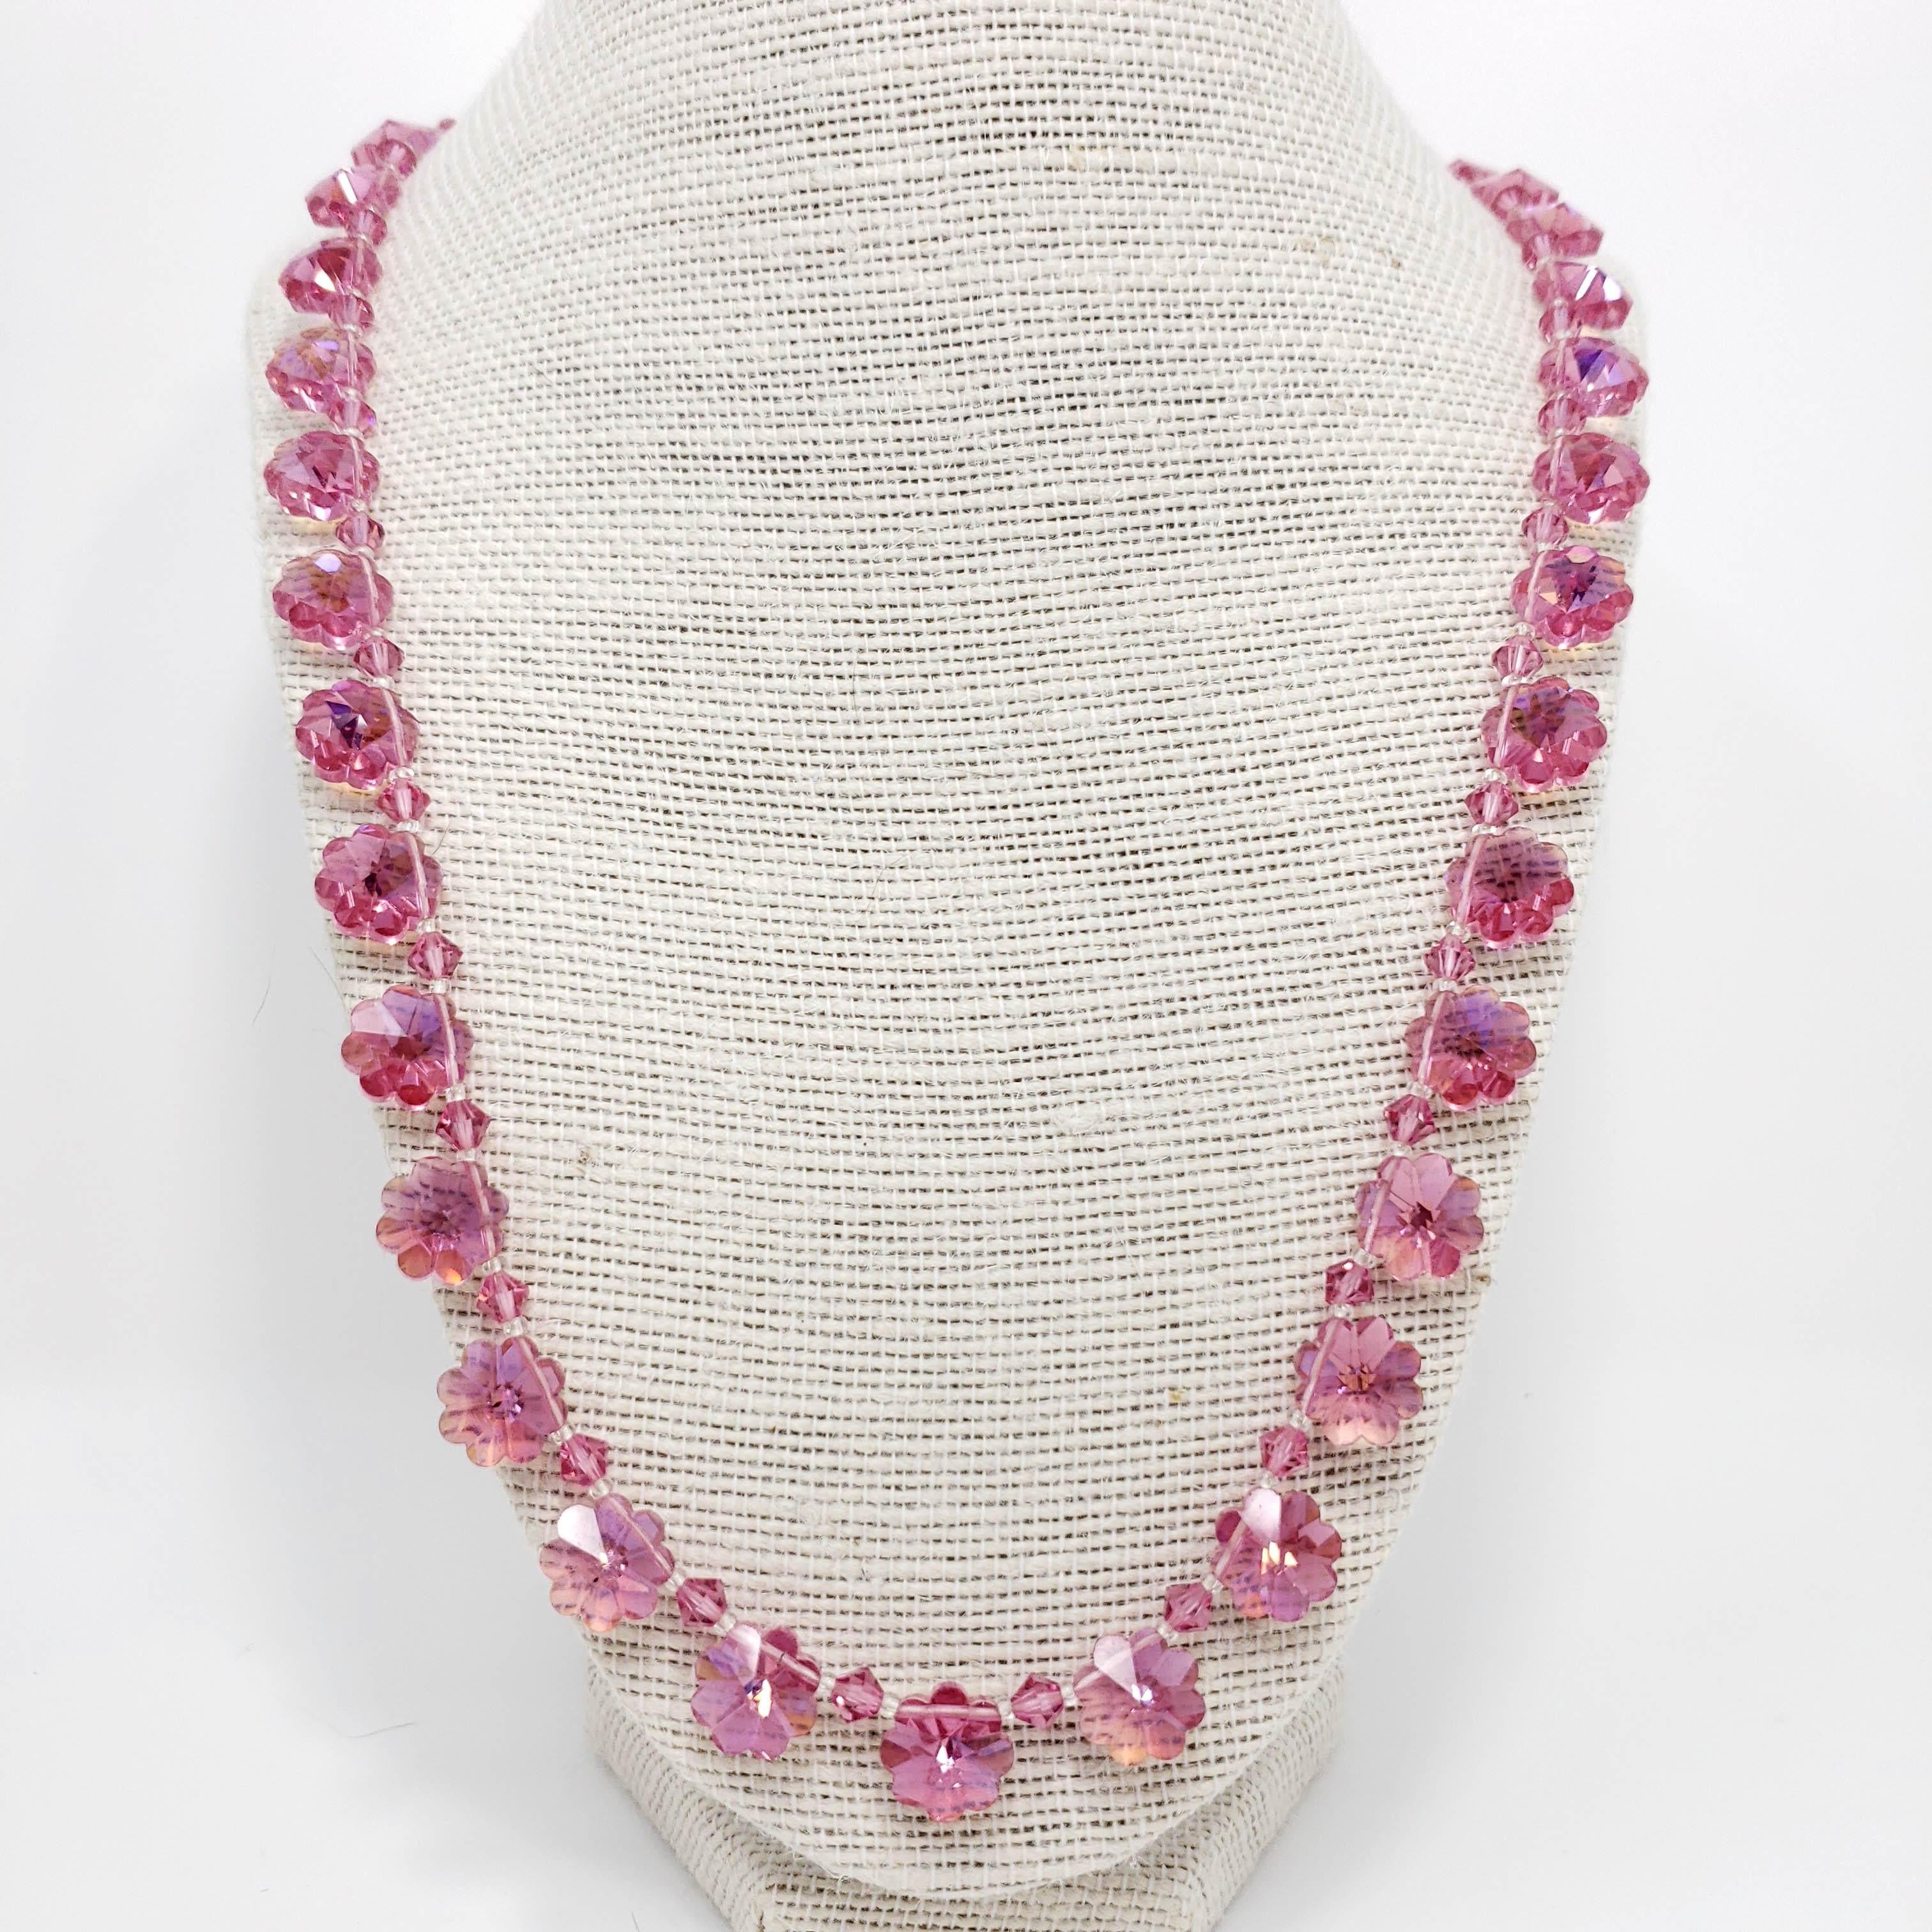 A rose-colored necklace with flower-shaped crystal beads, with a glowing aurora borealis tint on one side of each bead. Gold tone box-style clasp.

Estimated date mid 1900s.